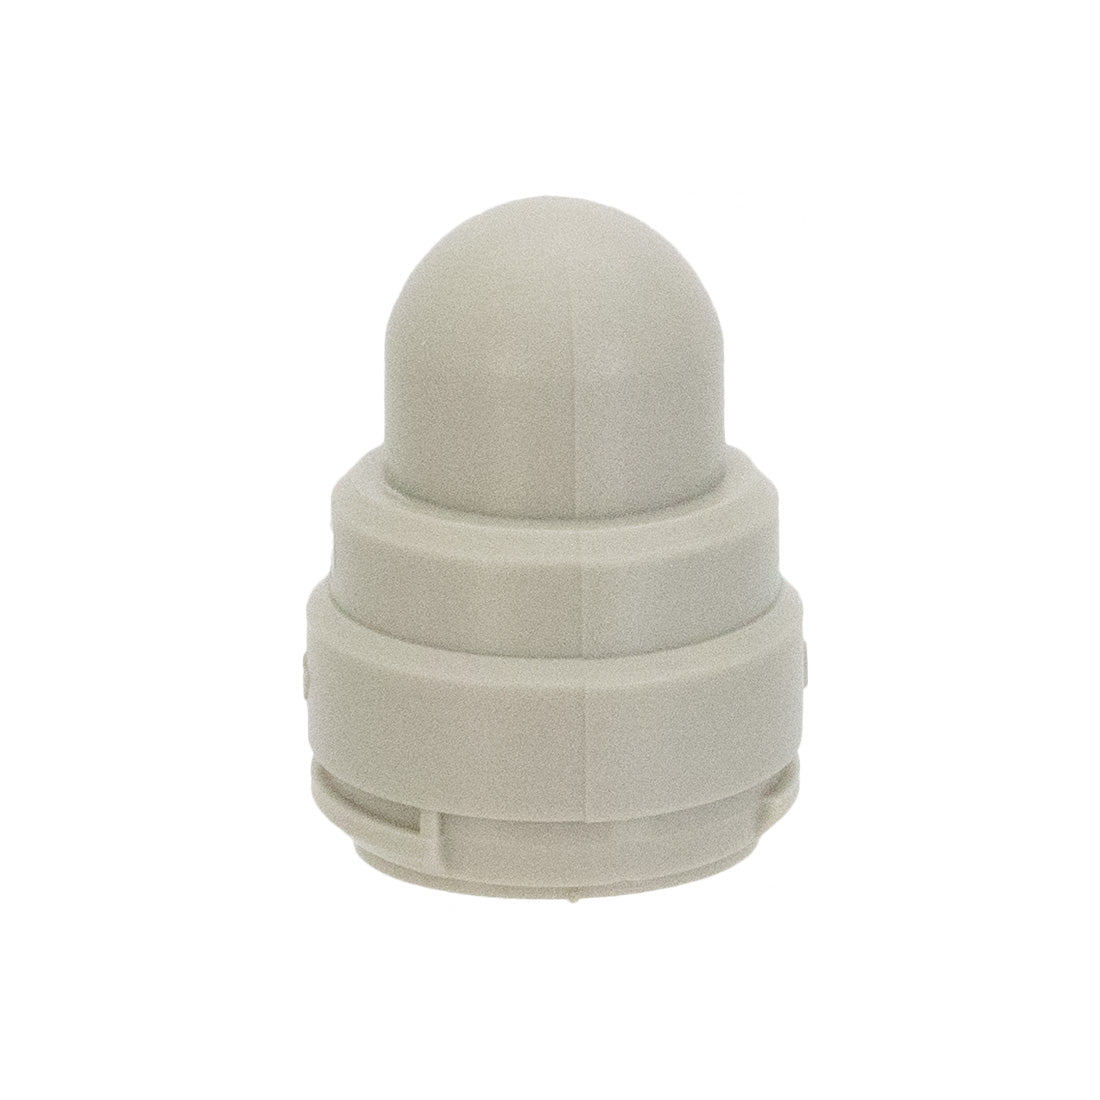 XERO Screen Cleaner Replacement Plug - Front View